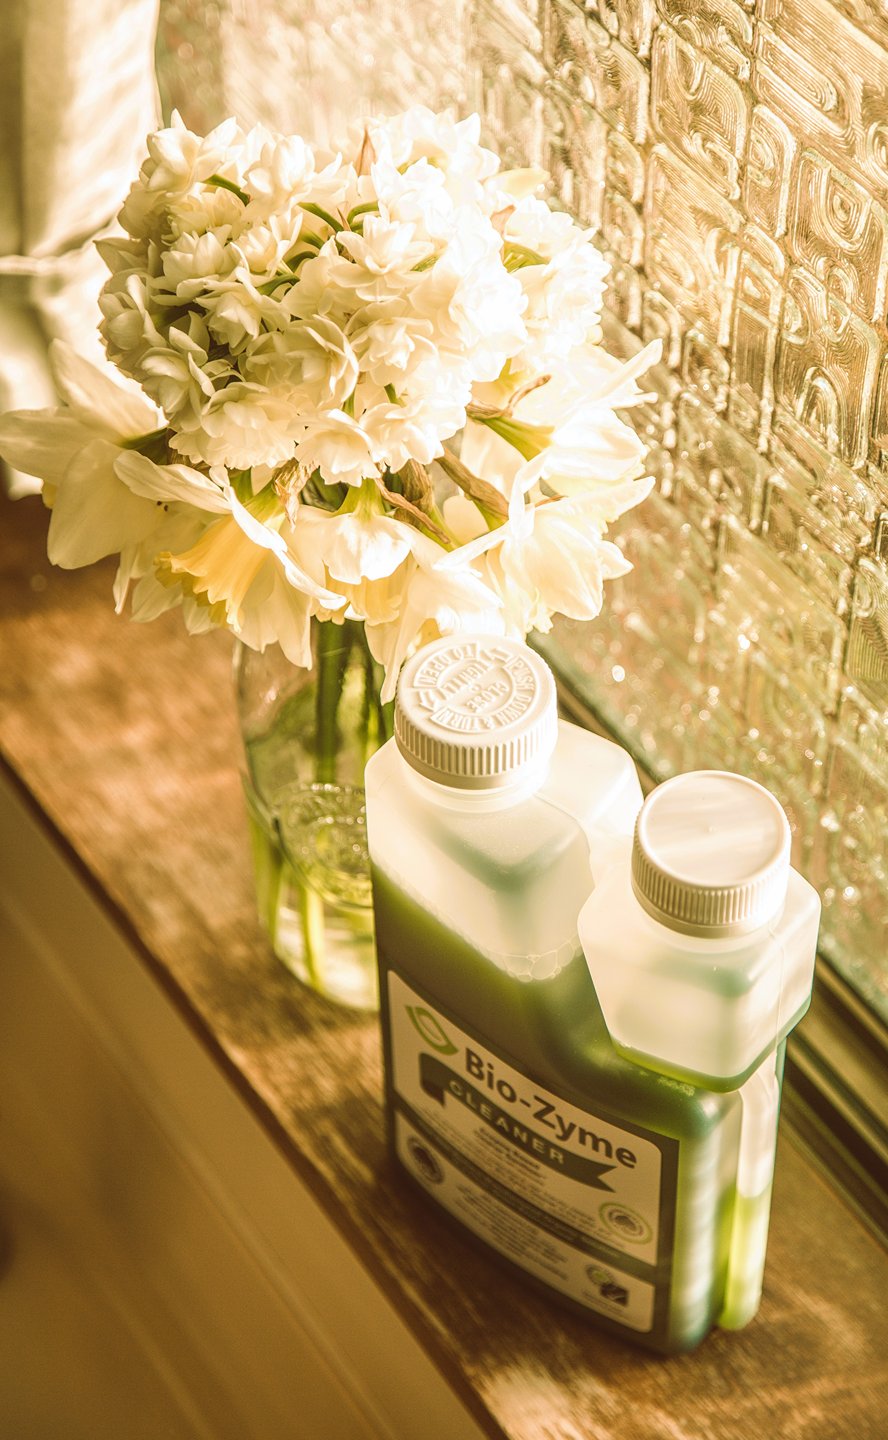 In front of a class window, Bio-Zyme Cleaner next to a jar with white flowers.